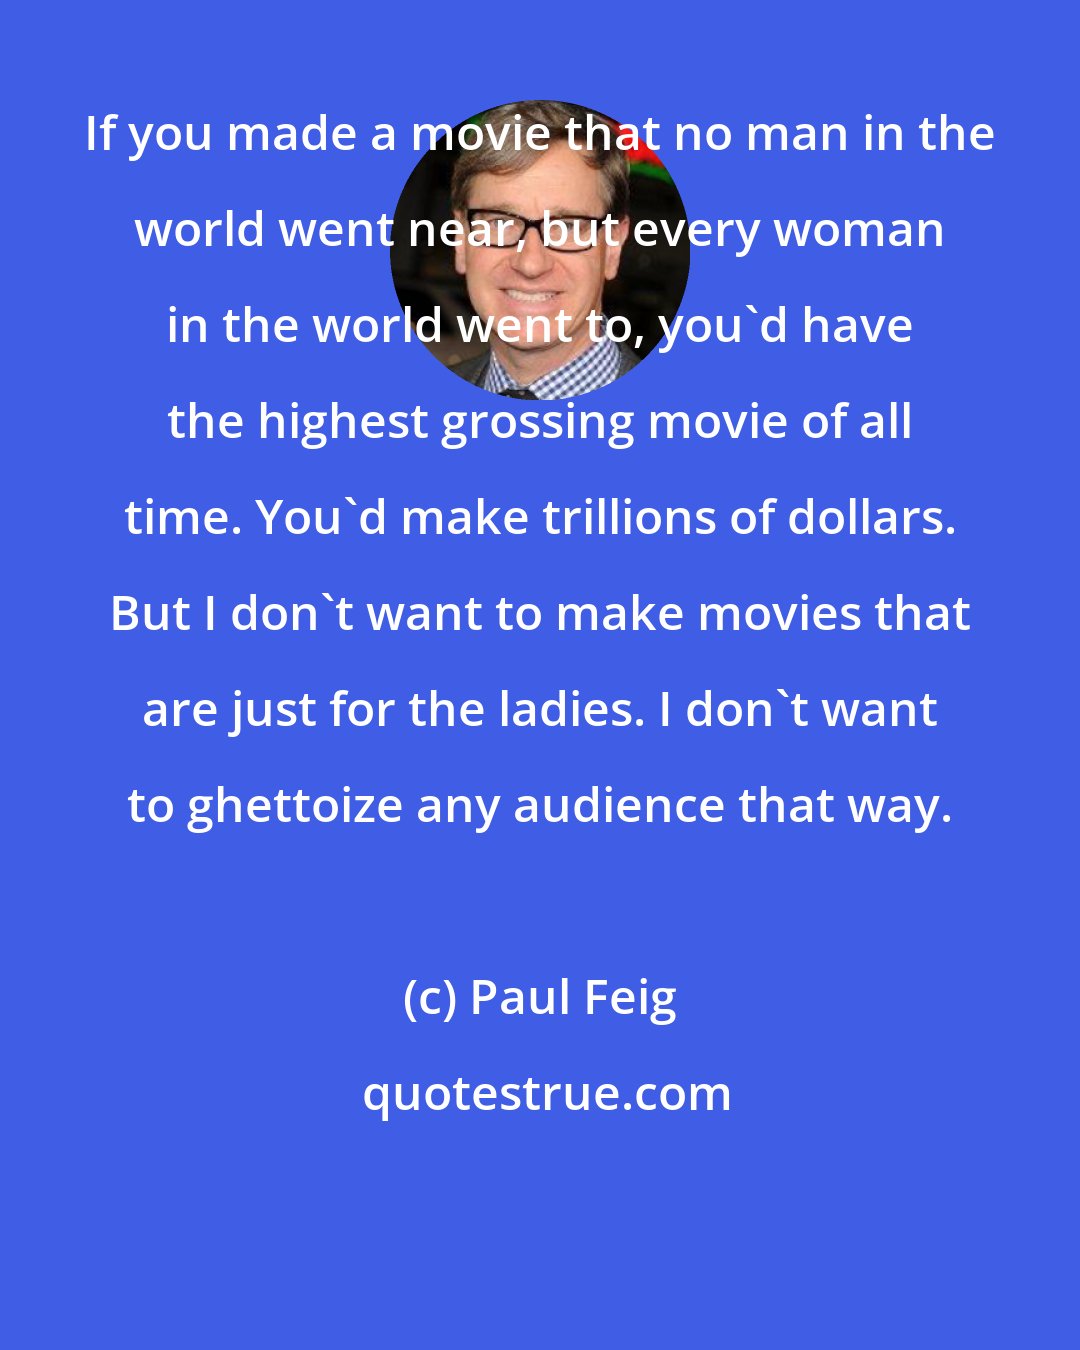 Paul Feig: If you made a movie that no man in the world went near, but every woman in the world went to, you'd have the highest grossing movie of all time. You'd make trillions of dollars. But I don't want to make movies that are just for the ladies. I don't want to ghettoize any audience that way.